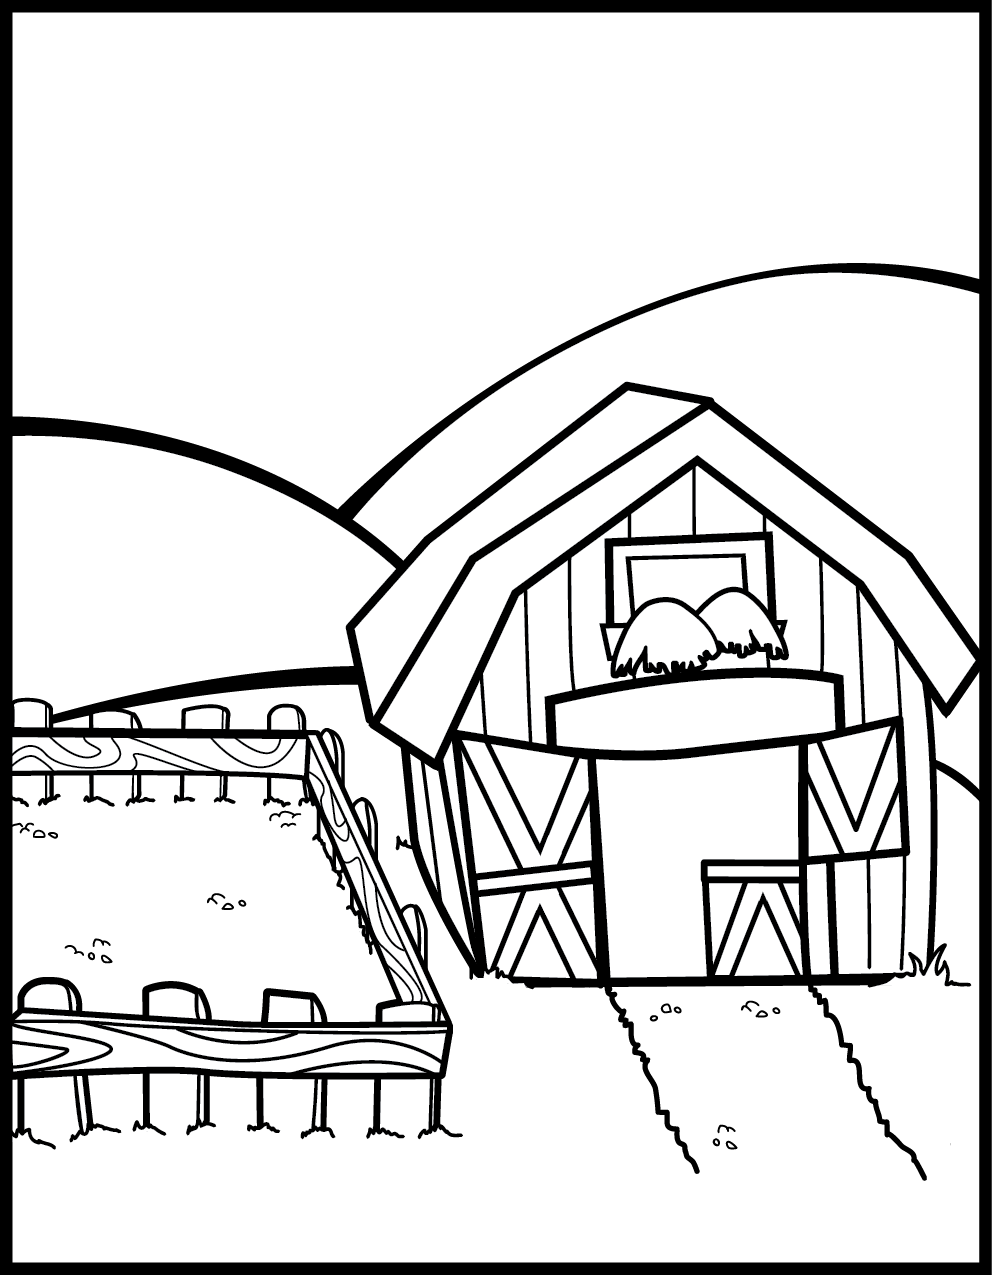 9 Pics of Farmer Coloring Pages For Preschool - Kids Farm Coloring ...